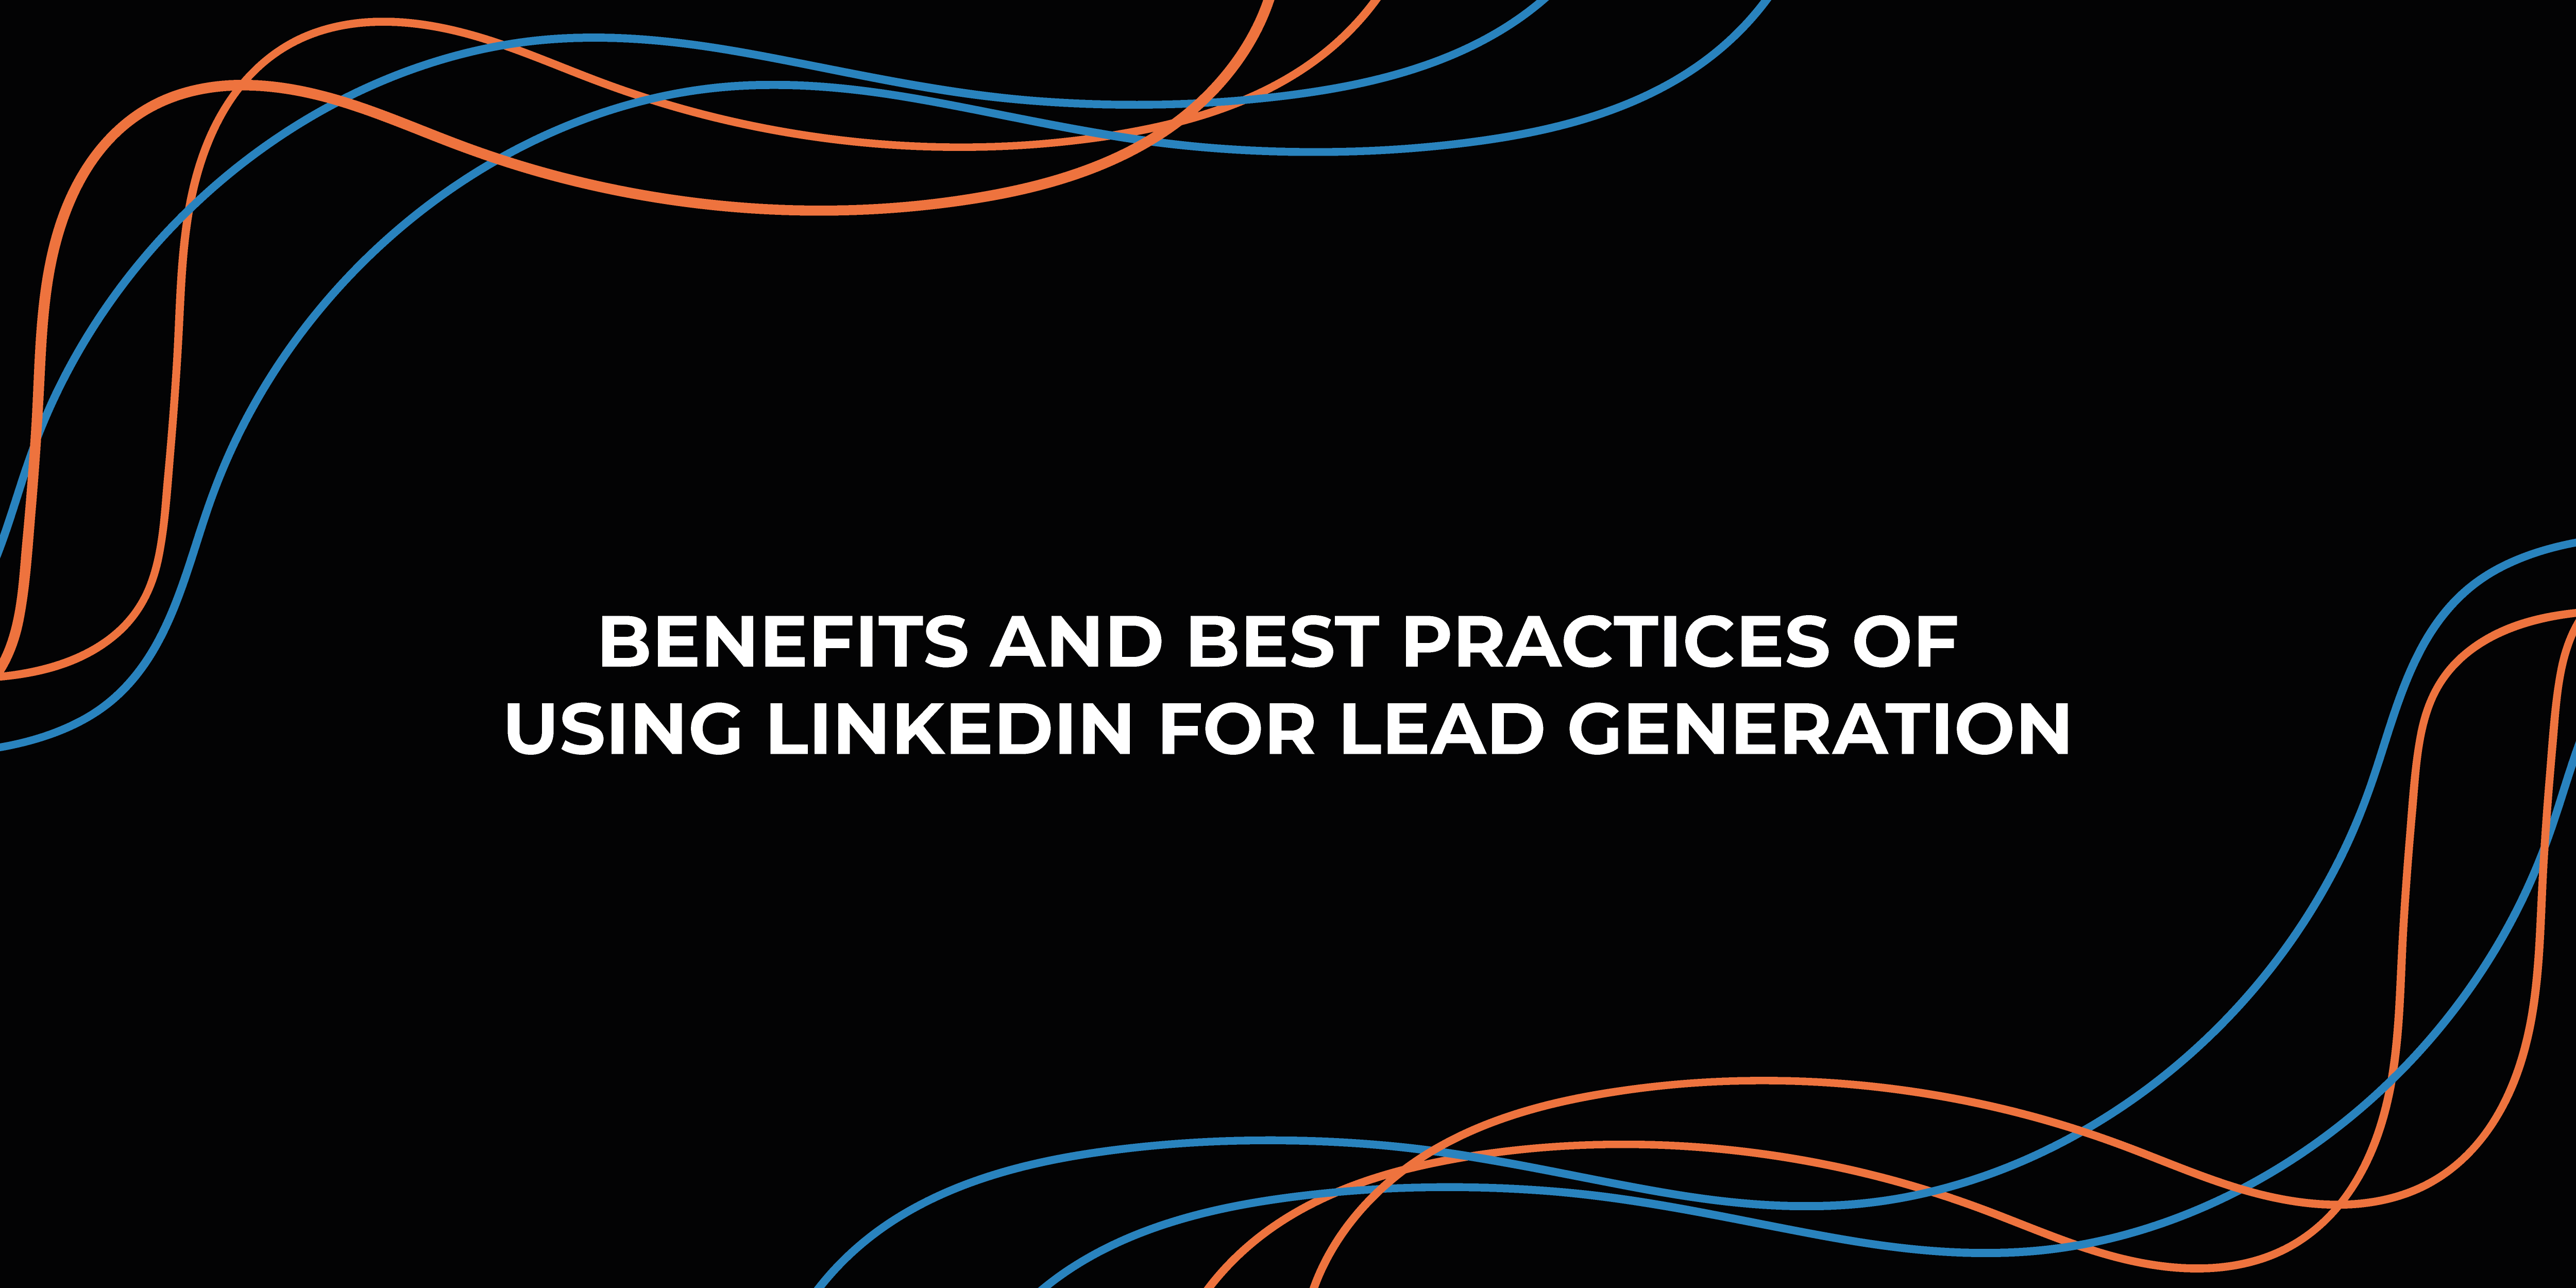 Benefits and Best Practices of Using LinkedIn for Lead Generation